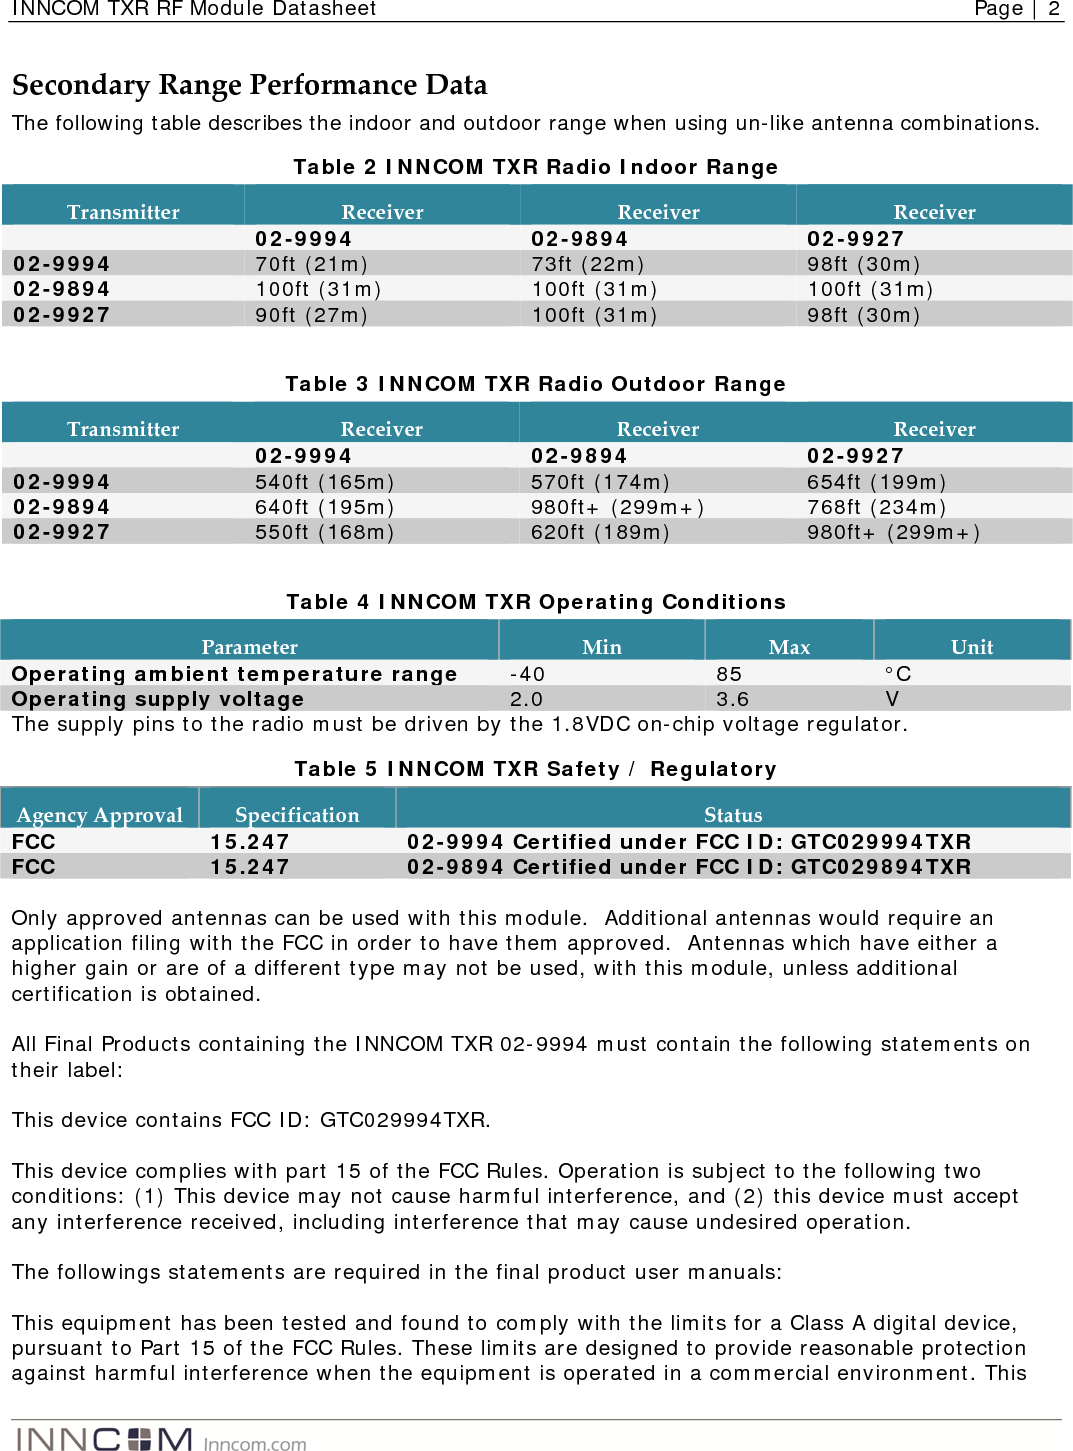 INNCOM TXR RF Module Datasheet    Page | 2   SecondaryRangePerformanceDataThe following table describes the indoor and outdoor range when using un-like antenna combinations. Table 2 INNCOM TXR Radio Indoor Range TransmitterReceiverReceiverReceiver 02-9994  02-9894  02-9927 02-9994  70ft (21m)  73ft (22m)  98ft (30m) 02-9894  100ft (31m)  100ft (31m)  100ft (31m) 02-9927  90ft (27m)  100ft (31m)  98ft (30m)  Table 3 INNCOM TXR Radio Outdoor Range TransmitterReceiverReceiverReceiver 02-9994  02-9894  02-9927 02-9994  540ft (165m)  570ft (174m)  654ft (199m) 02-9894  640ft (195m)  980ft+ (299m+)  768ft (234m) 02-9927  550ft (168m)  620ft (189m)  980ft+ (299m+)  Table 4 INNCOM TXR Operating Conditions ParameterMinMaxUnitOperating ambient temperature range  -40  85  °C Operating supply voltage  2.0  3.6  V The supply pins to the radio must be driven by the 1.8VDC on-chip voltage regulator. Table 5 INNCOM TXR Safety / Regulatory AgencyApprovalSpecificationStatusFCC 15.247 02-9994 Certified under FCC ID: GTC029994TXR FCC  15.247  02-9894 Certified under FCC ID: GTC029894TXR  Only approved antennas can be used with this module.  Additional antennas would require an application filing with the FCC in order to have them approved.  Antennas which have either a higher gain or are of a different type may not be used, with this module, unless additional certification is obtained.    All Final Products containing the INNCOM TXR 02-9994 must contain the following statements on their label:  This device contains FCC ID: GTC029994TXR.    This device complies with part 15 of the FCC Rules. Operation is subject to the following two conditions: (1) This device may not cause harmful interference, and (2) this device must accept any interference received, including interference that may cause undesired operation.  The followings statements are required in the final product user manuals:  This equipment has been tested and found to comply with the limits for a Class A digital device, pursuant to Part 15 of the FCC Rules. These limits are designed to provide reasonable protection against harmful interference when the equipment is operated in a commercial environment. This 